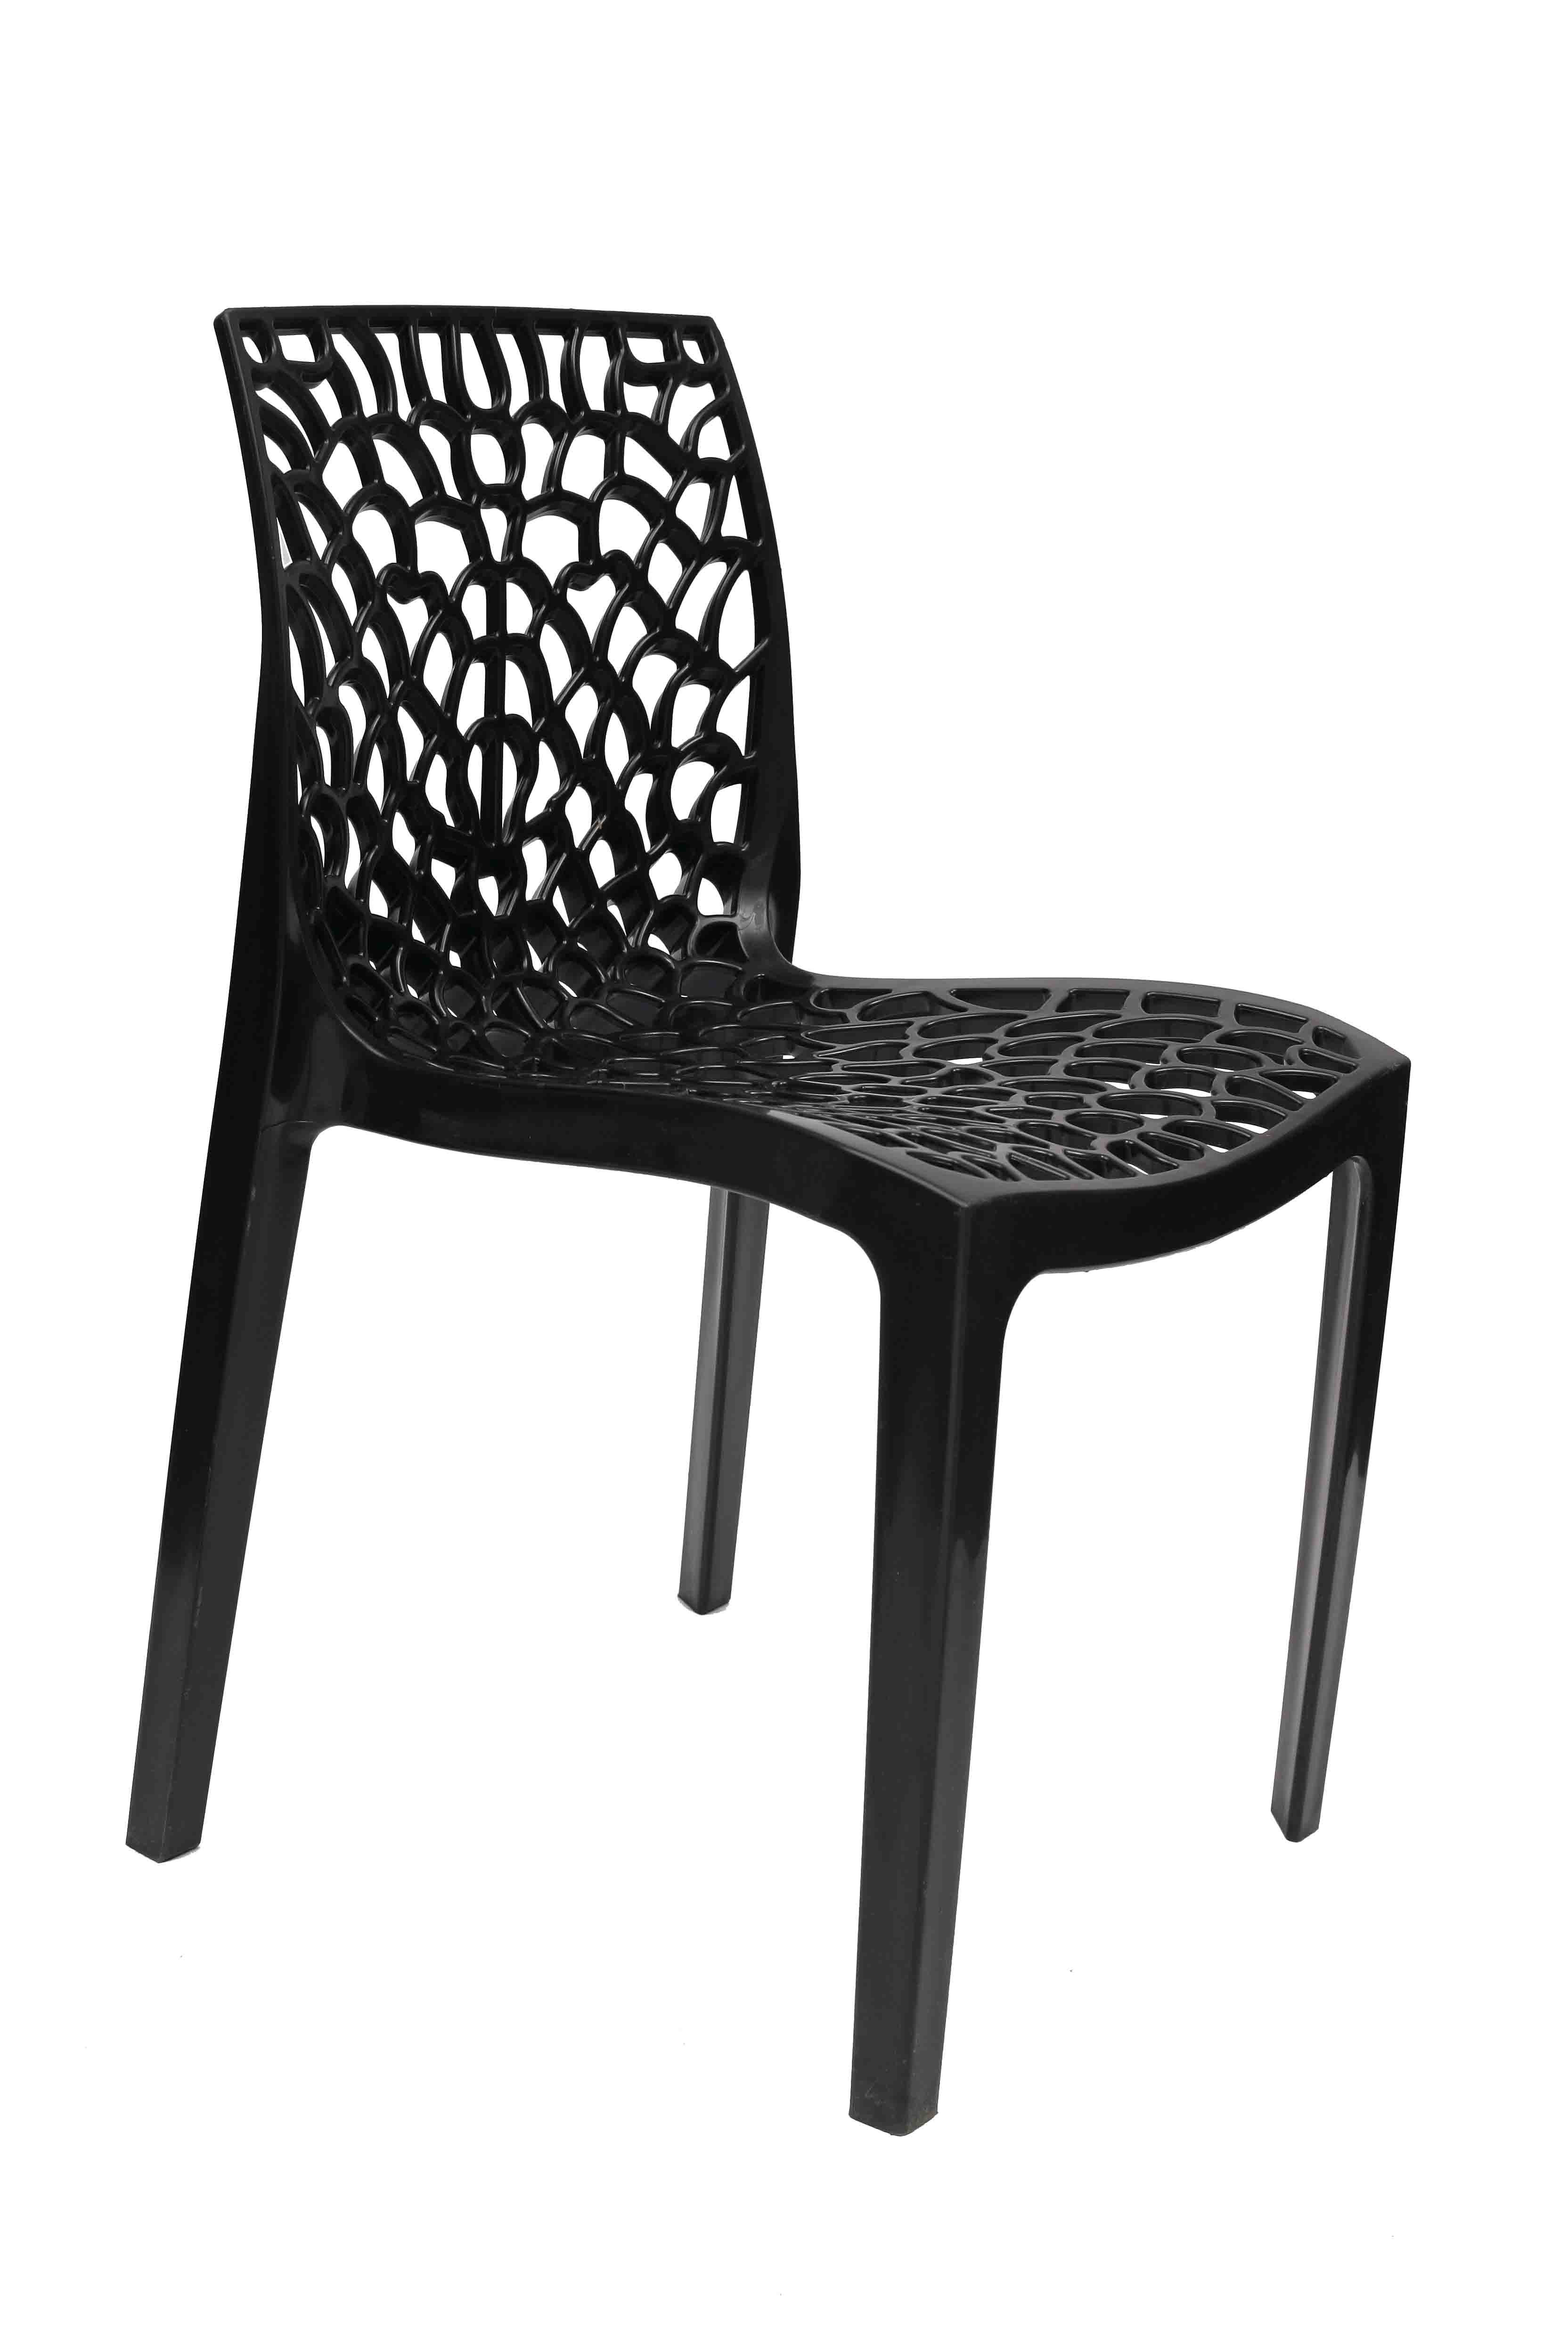 Ruby Plastic Chair Buy Ruby Plastic Chair Online At Best Prices In